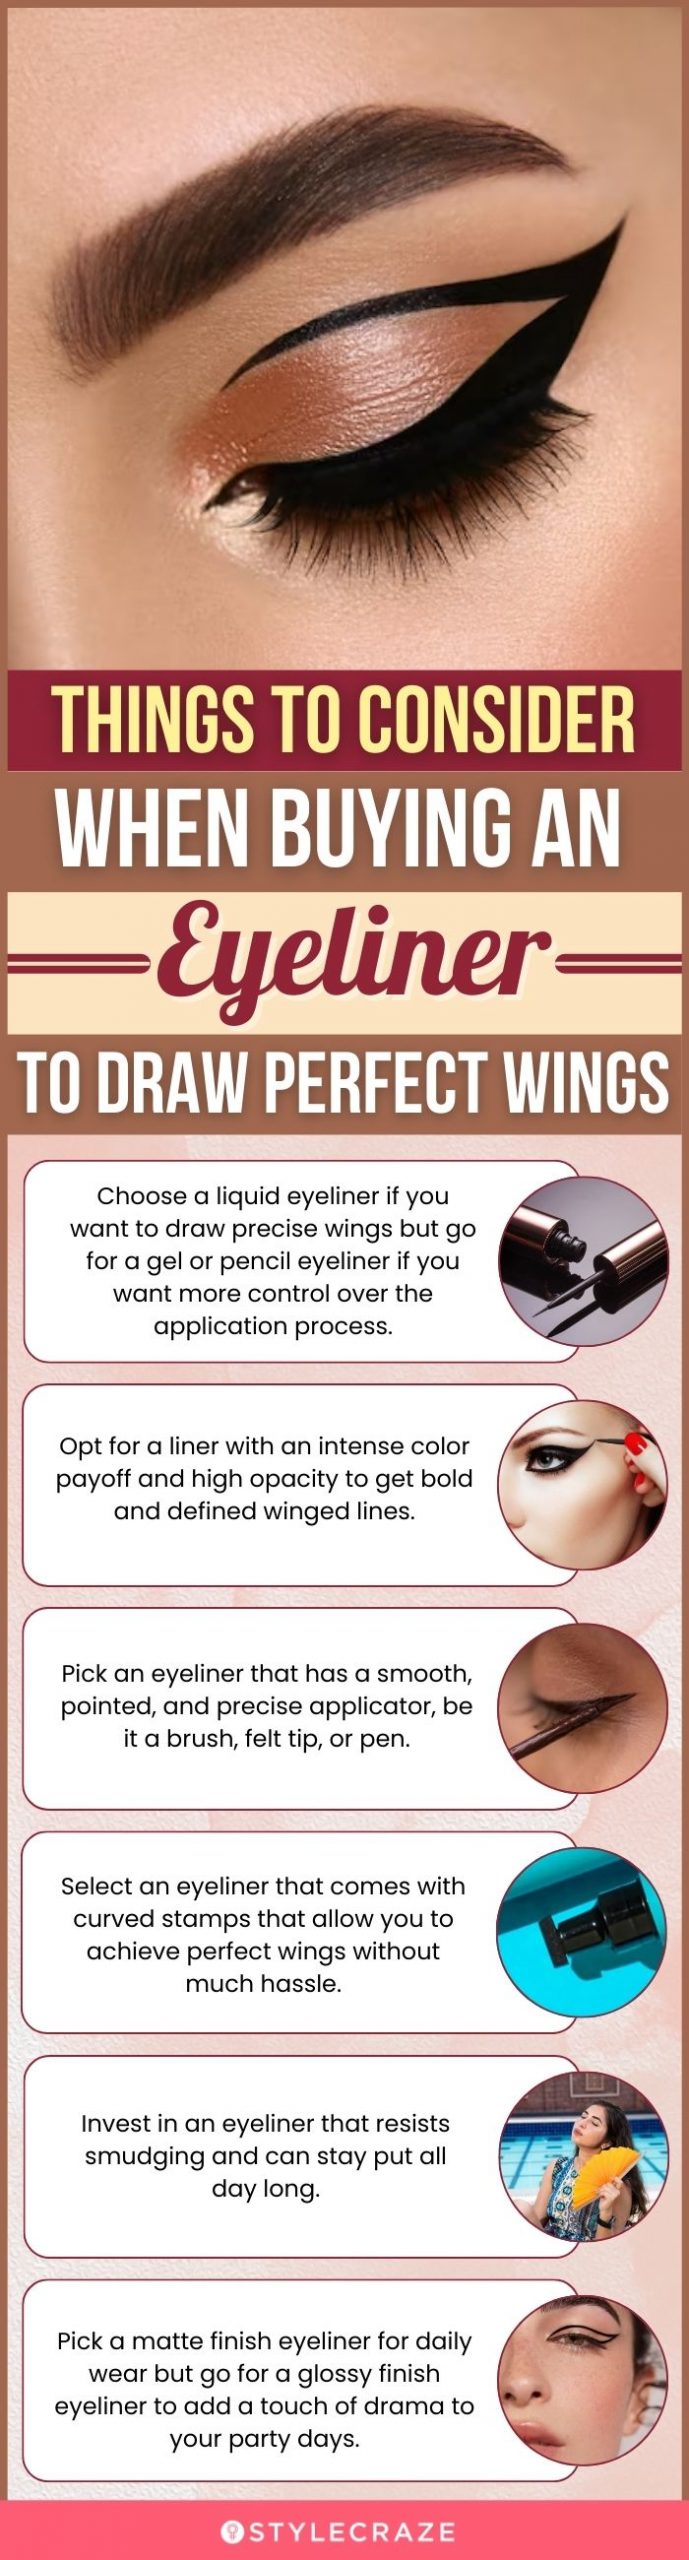 Things To Consider When Buying An Eyeliner To Draw Perfect Wings (infographic)